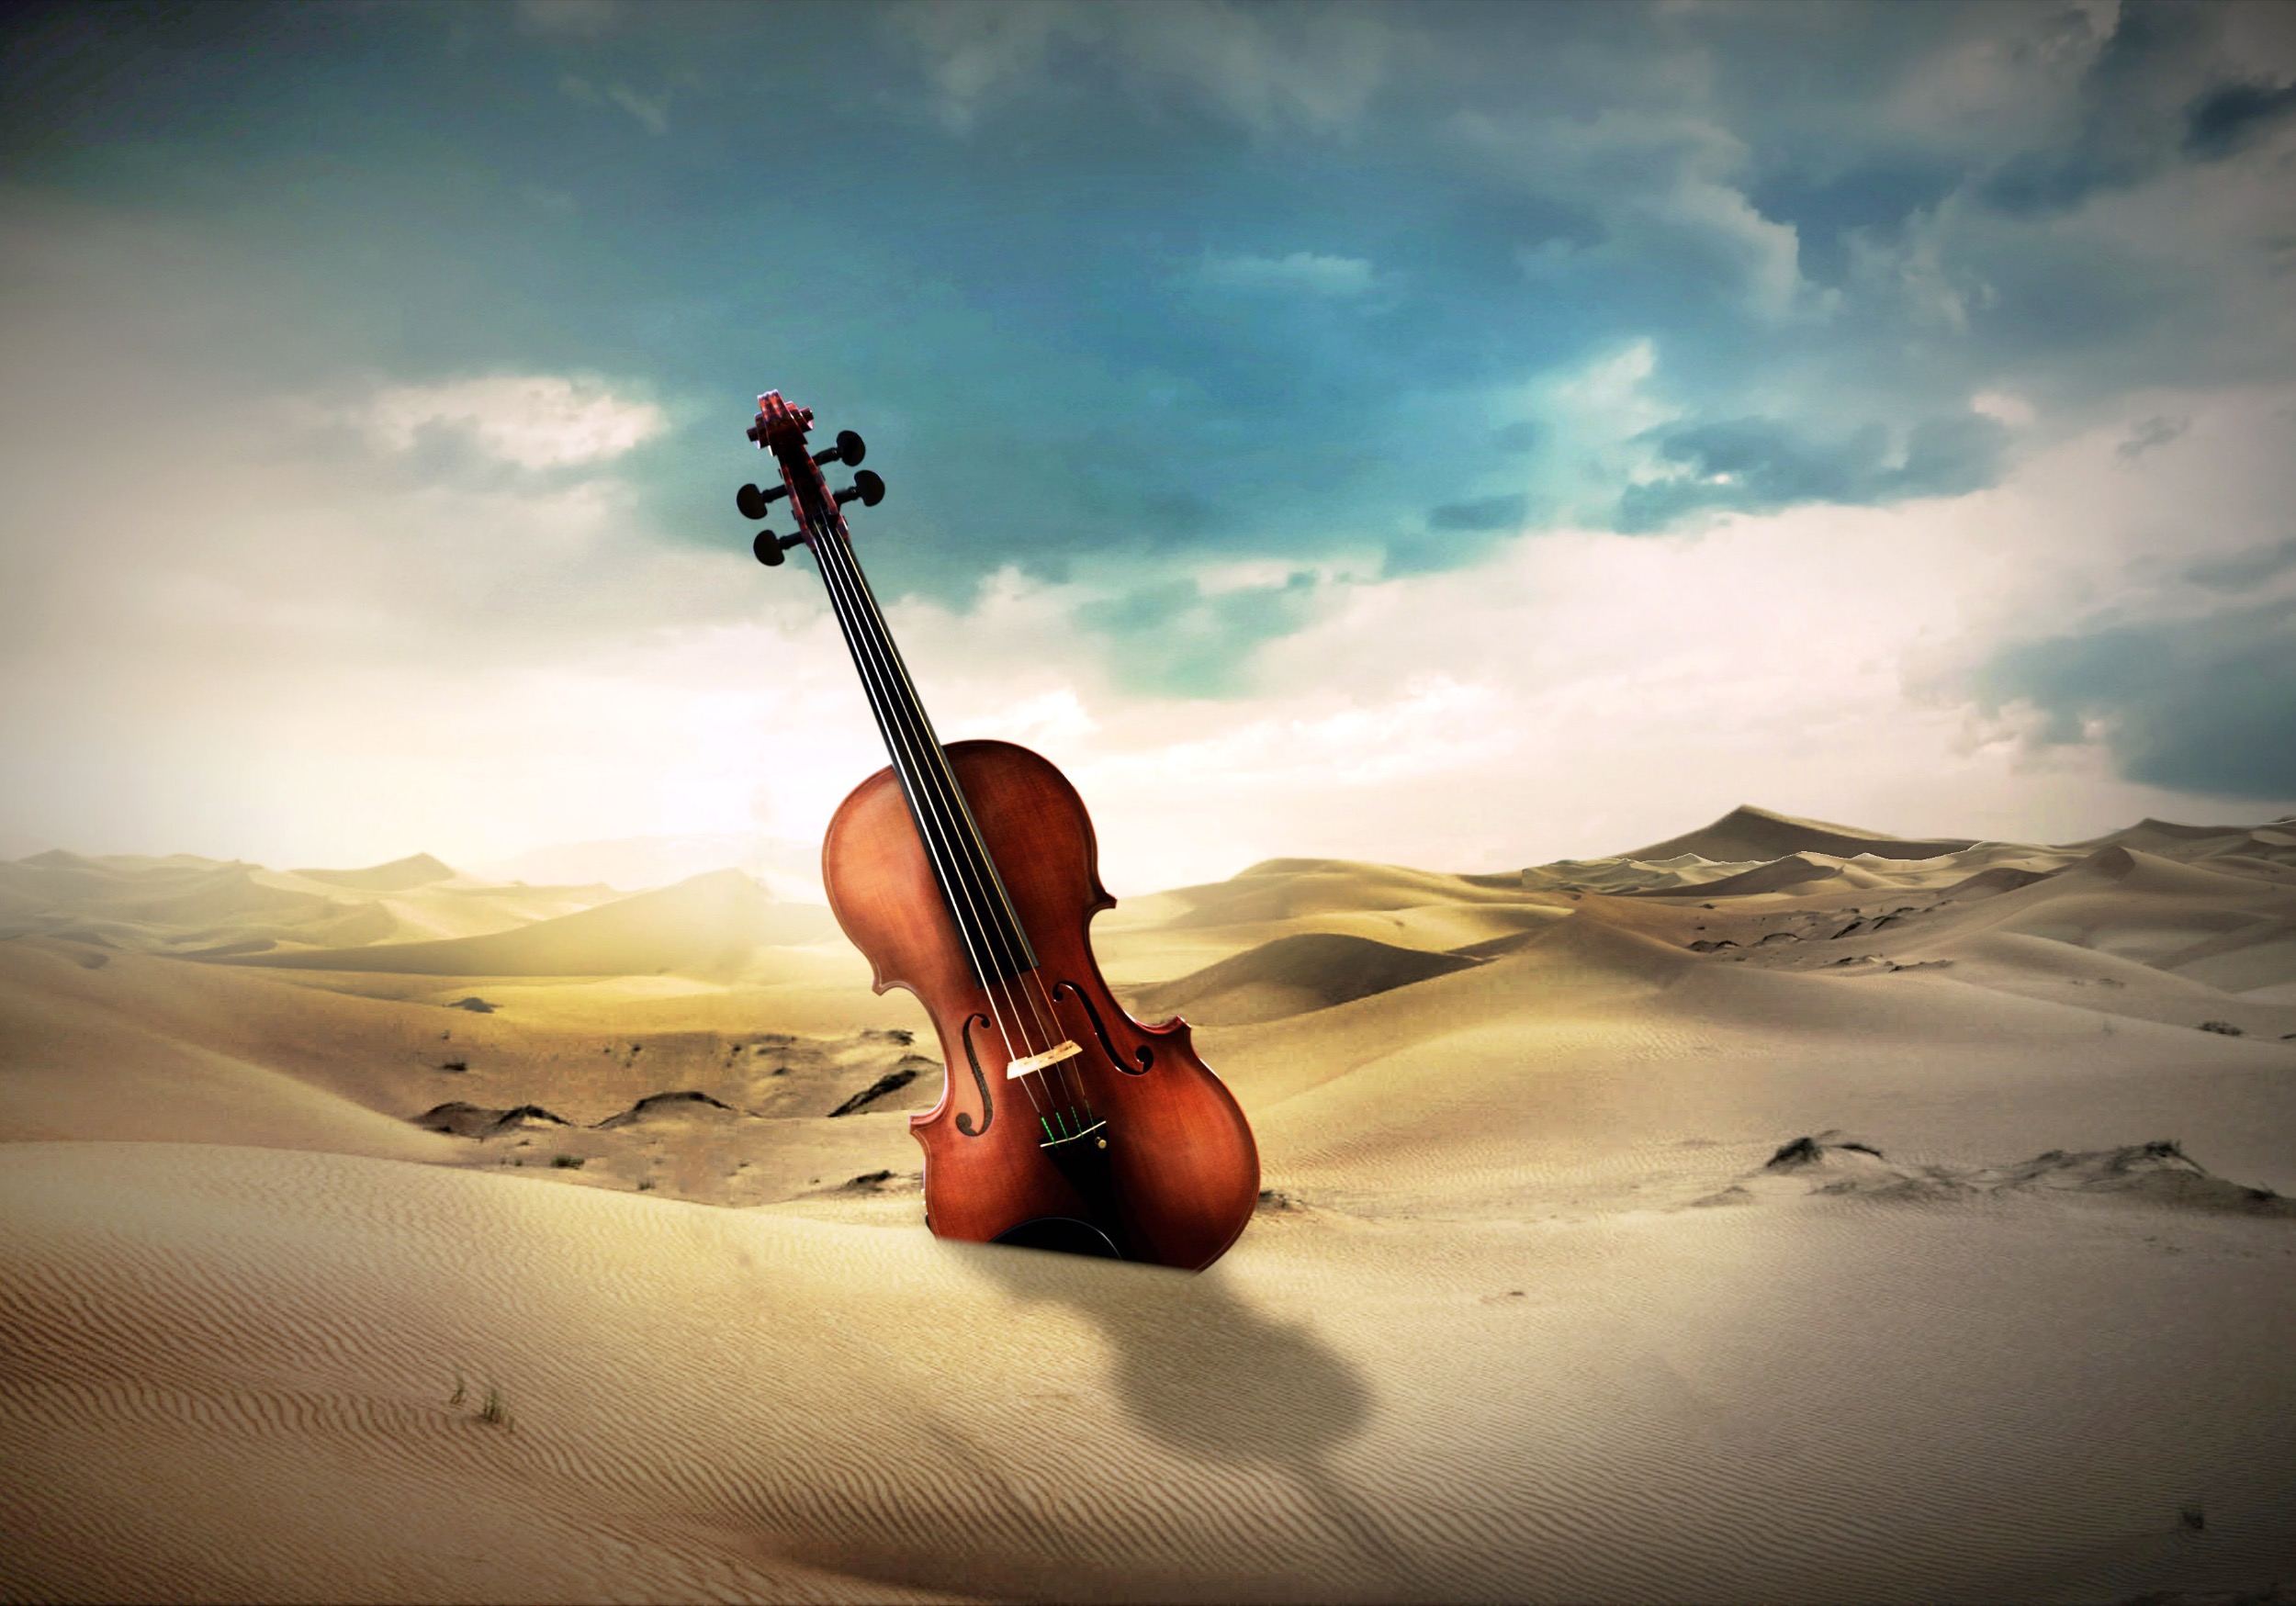 giant violin in a sandy desert with dark clouds overhead